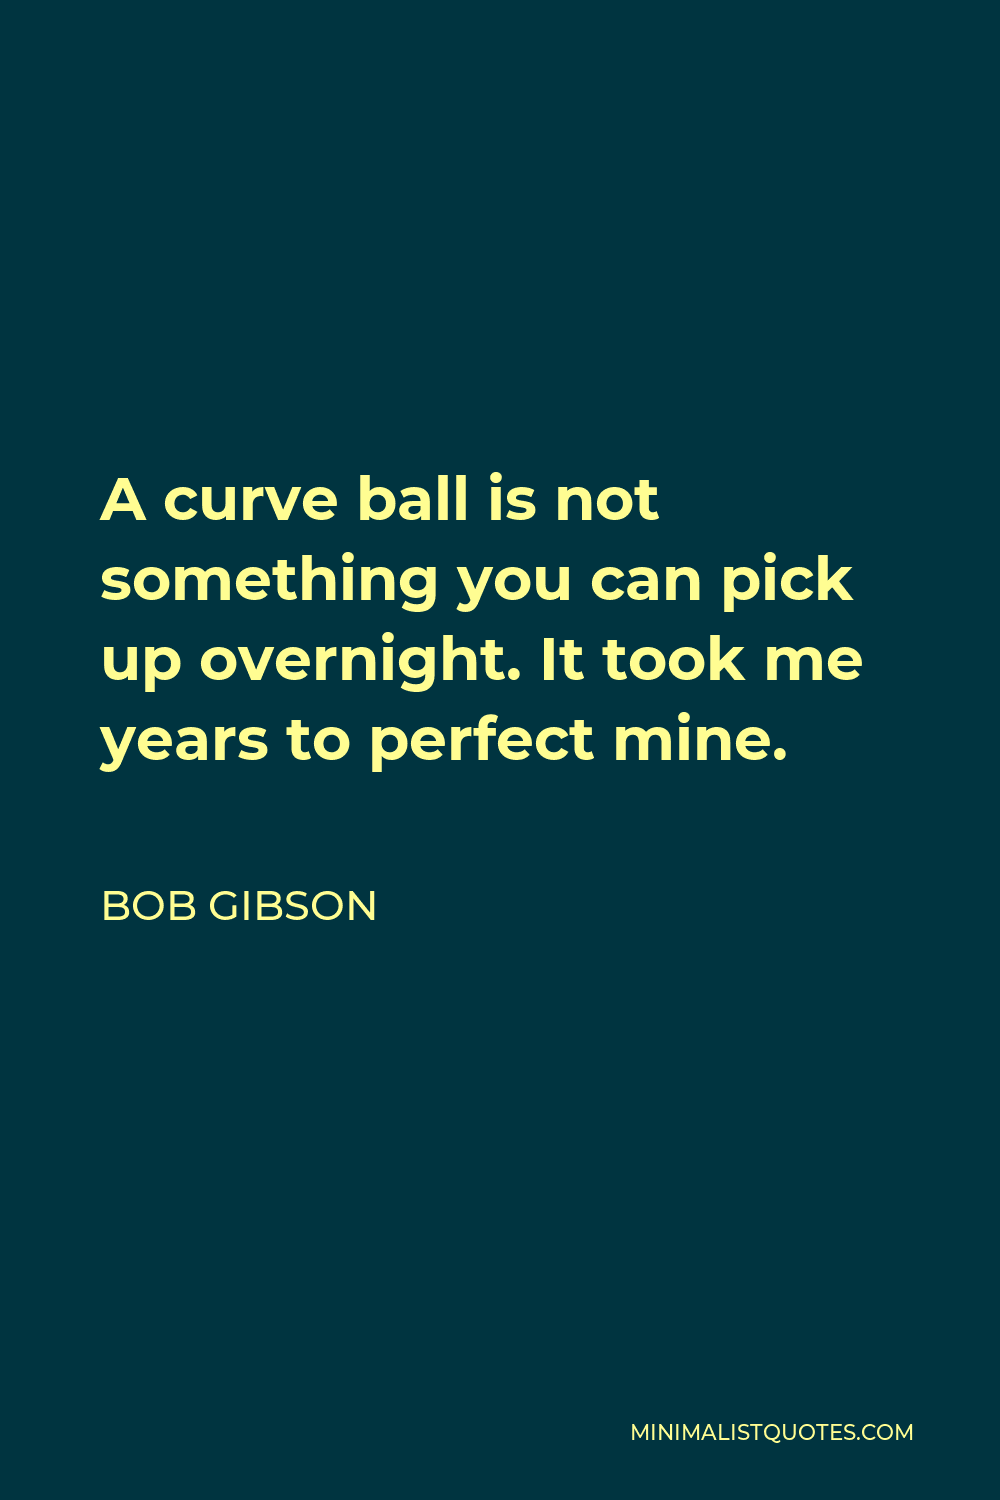 Bob Gibson Quote - A curve ball is not something you can pick up overnight. It took me years to perfect mine.